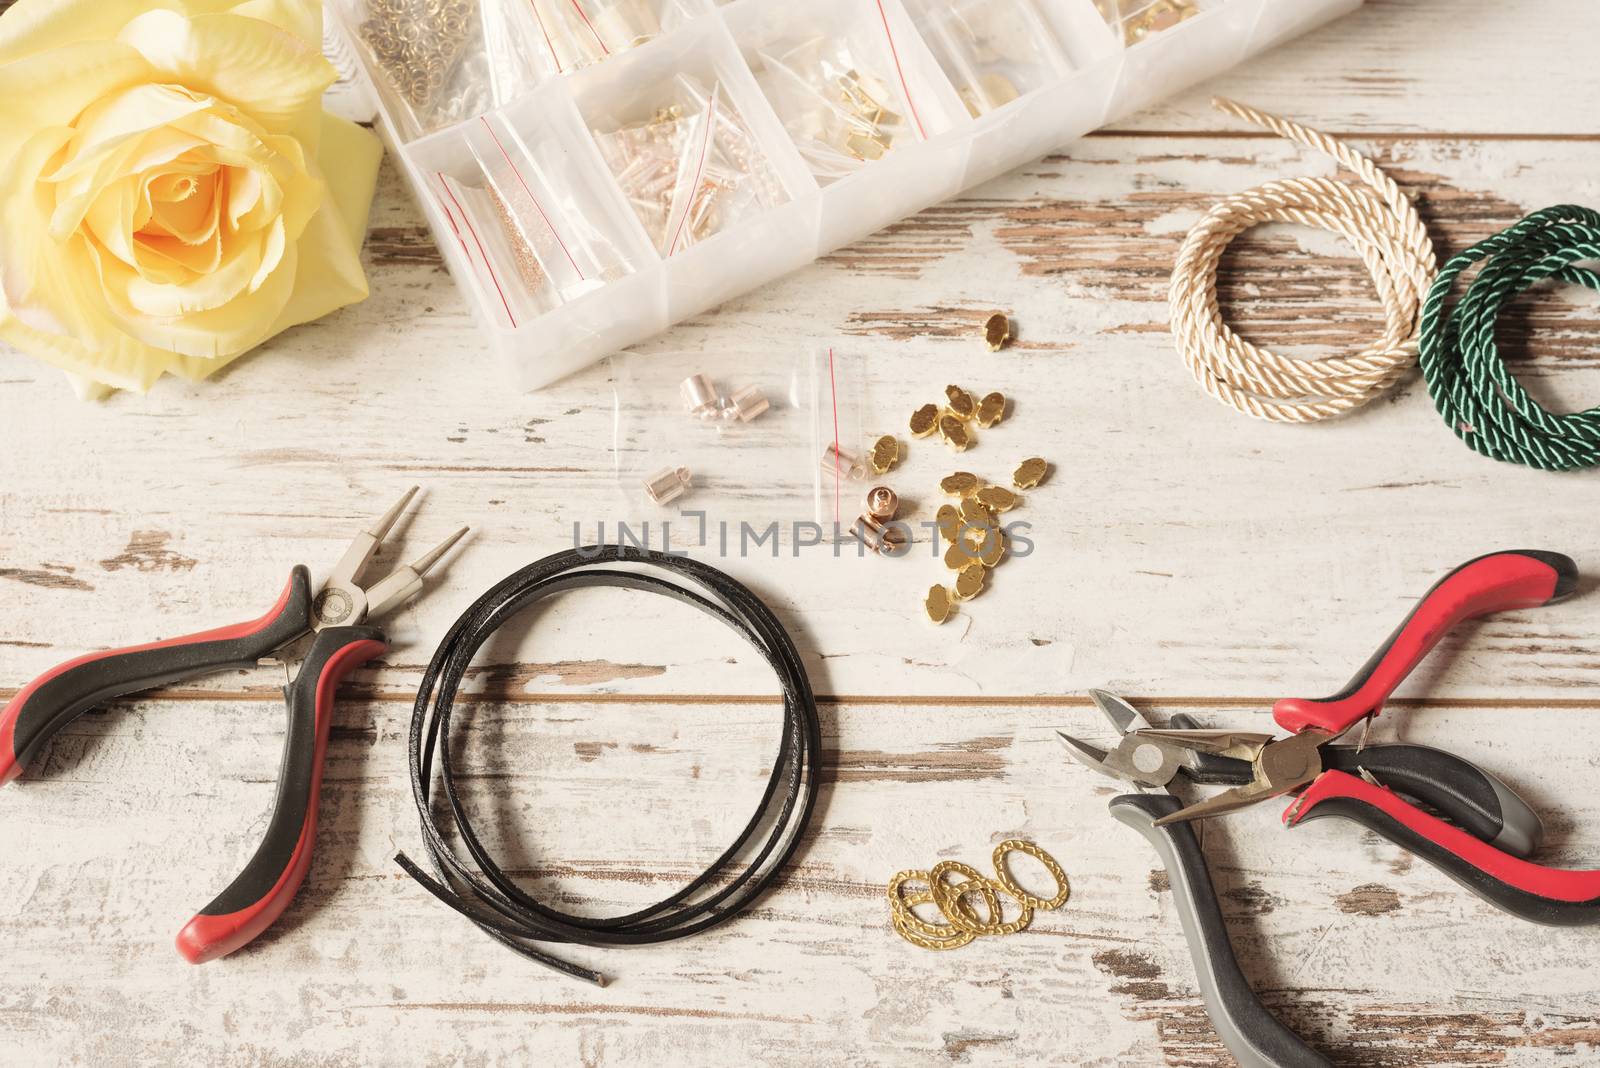 Workspace with tools for making jewelry - pliers, leather, earrings and bracelets, necklace. Kraft tools. Bright rustic wooden desk, table